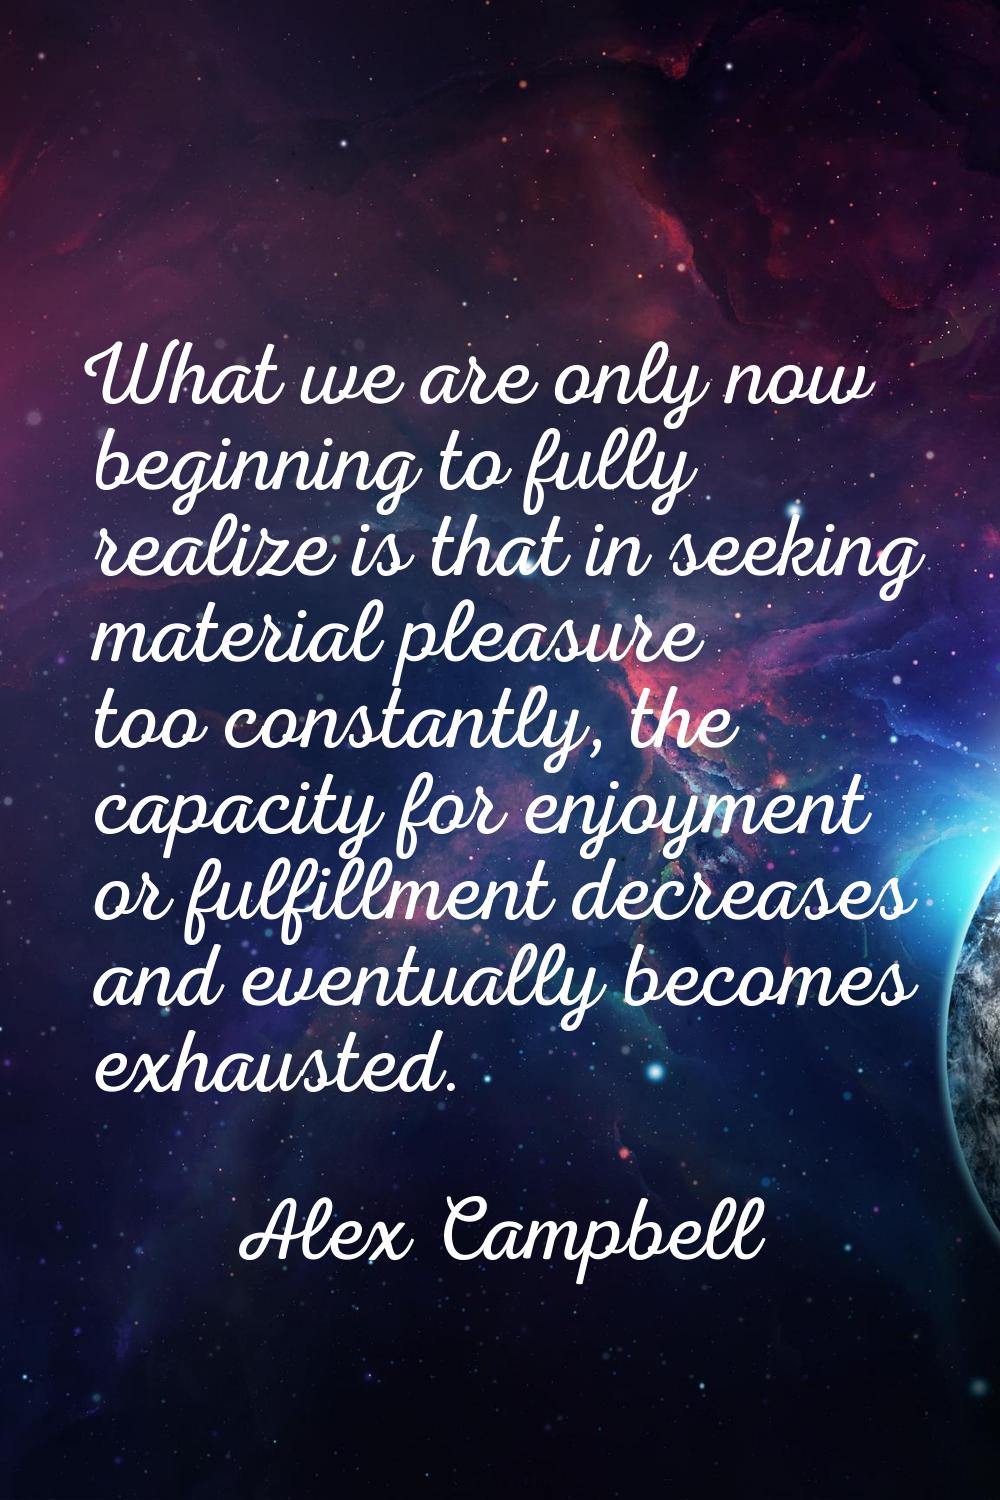 What we are only now beginning to fully realize is that in seeking material pleasure too constantly